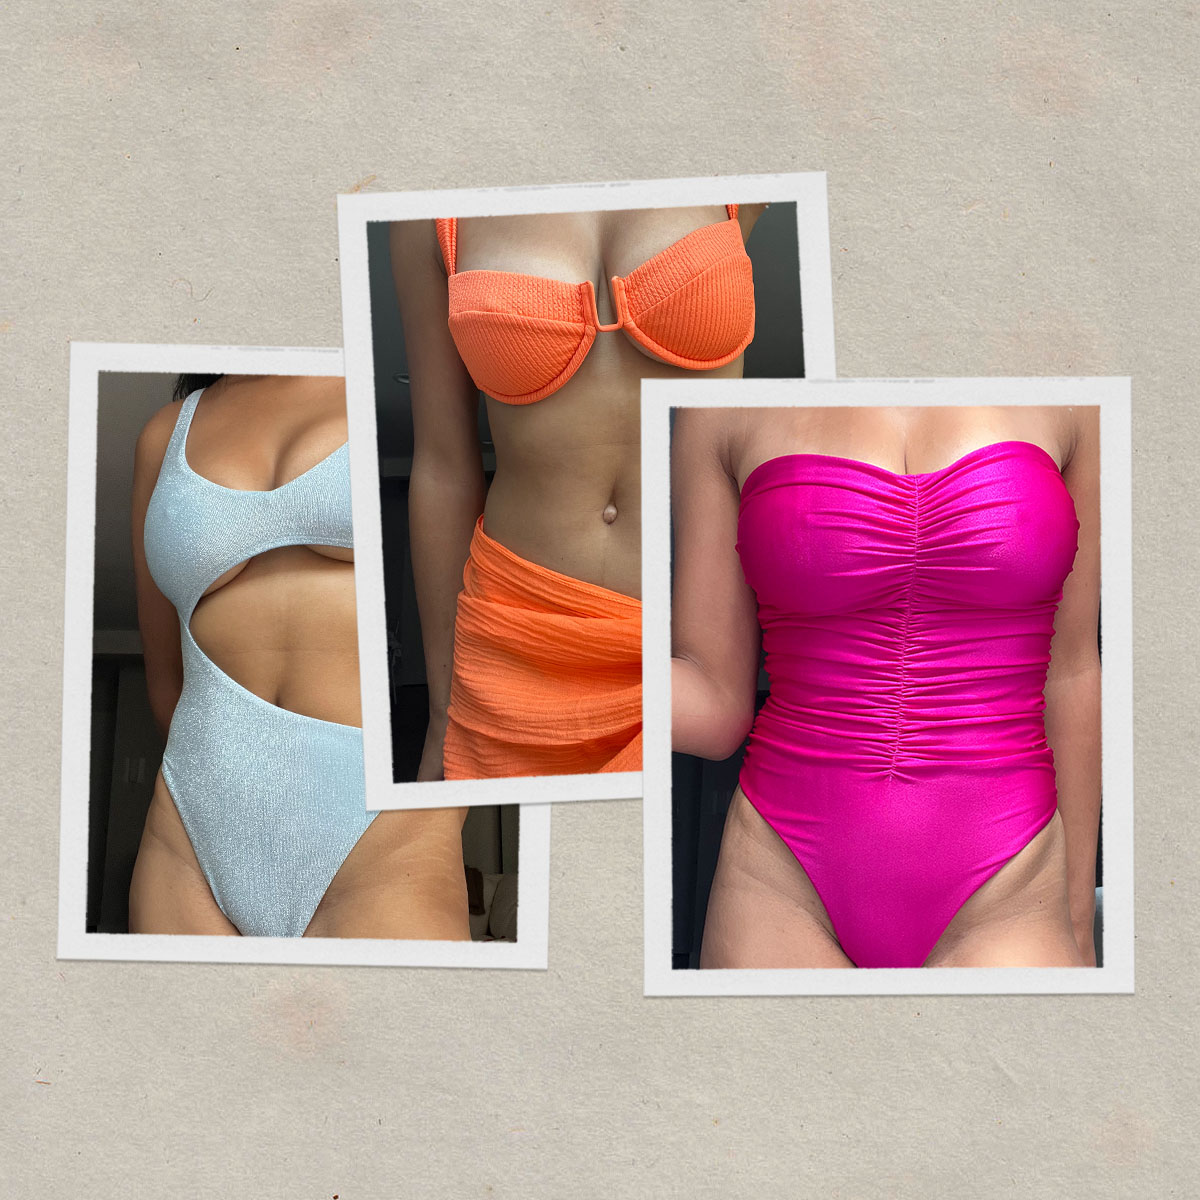 10 Swimsuit Styles That Work for Bigger Busts